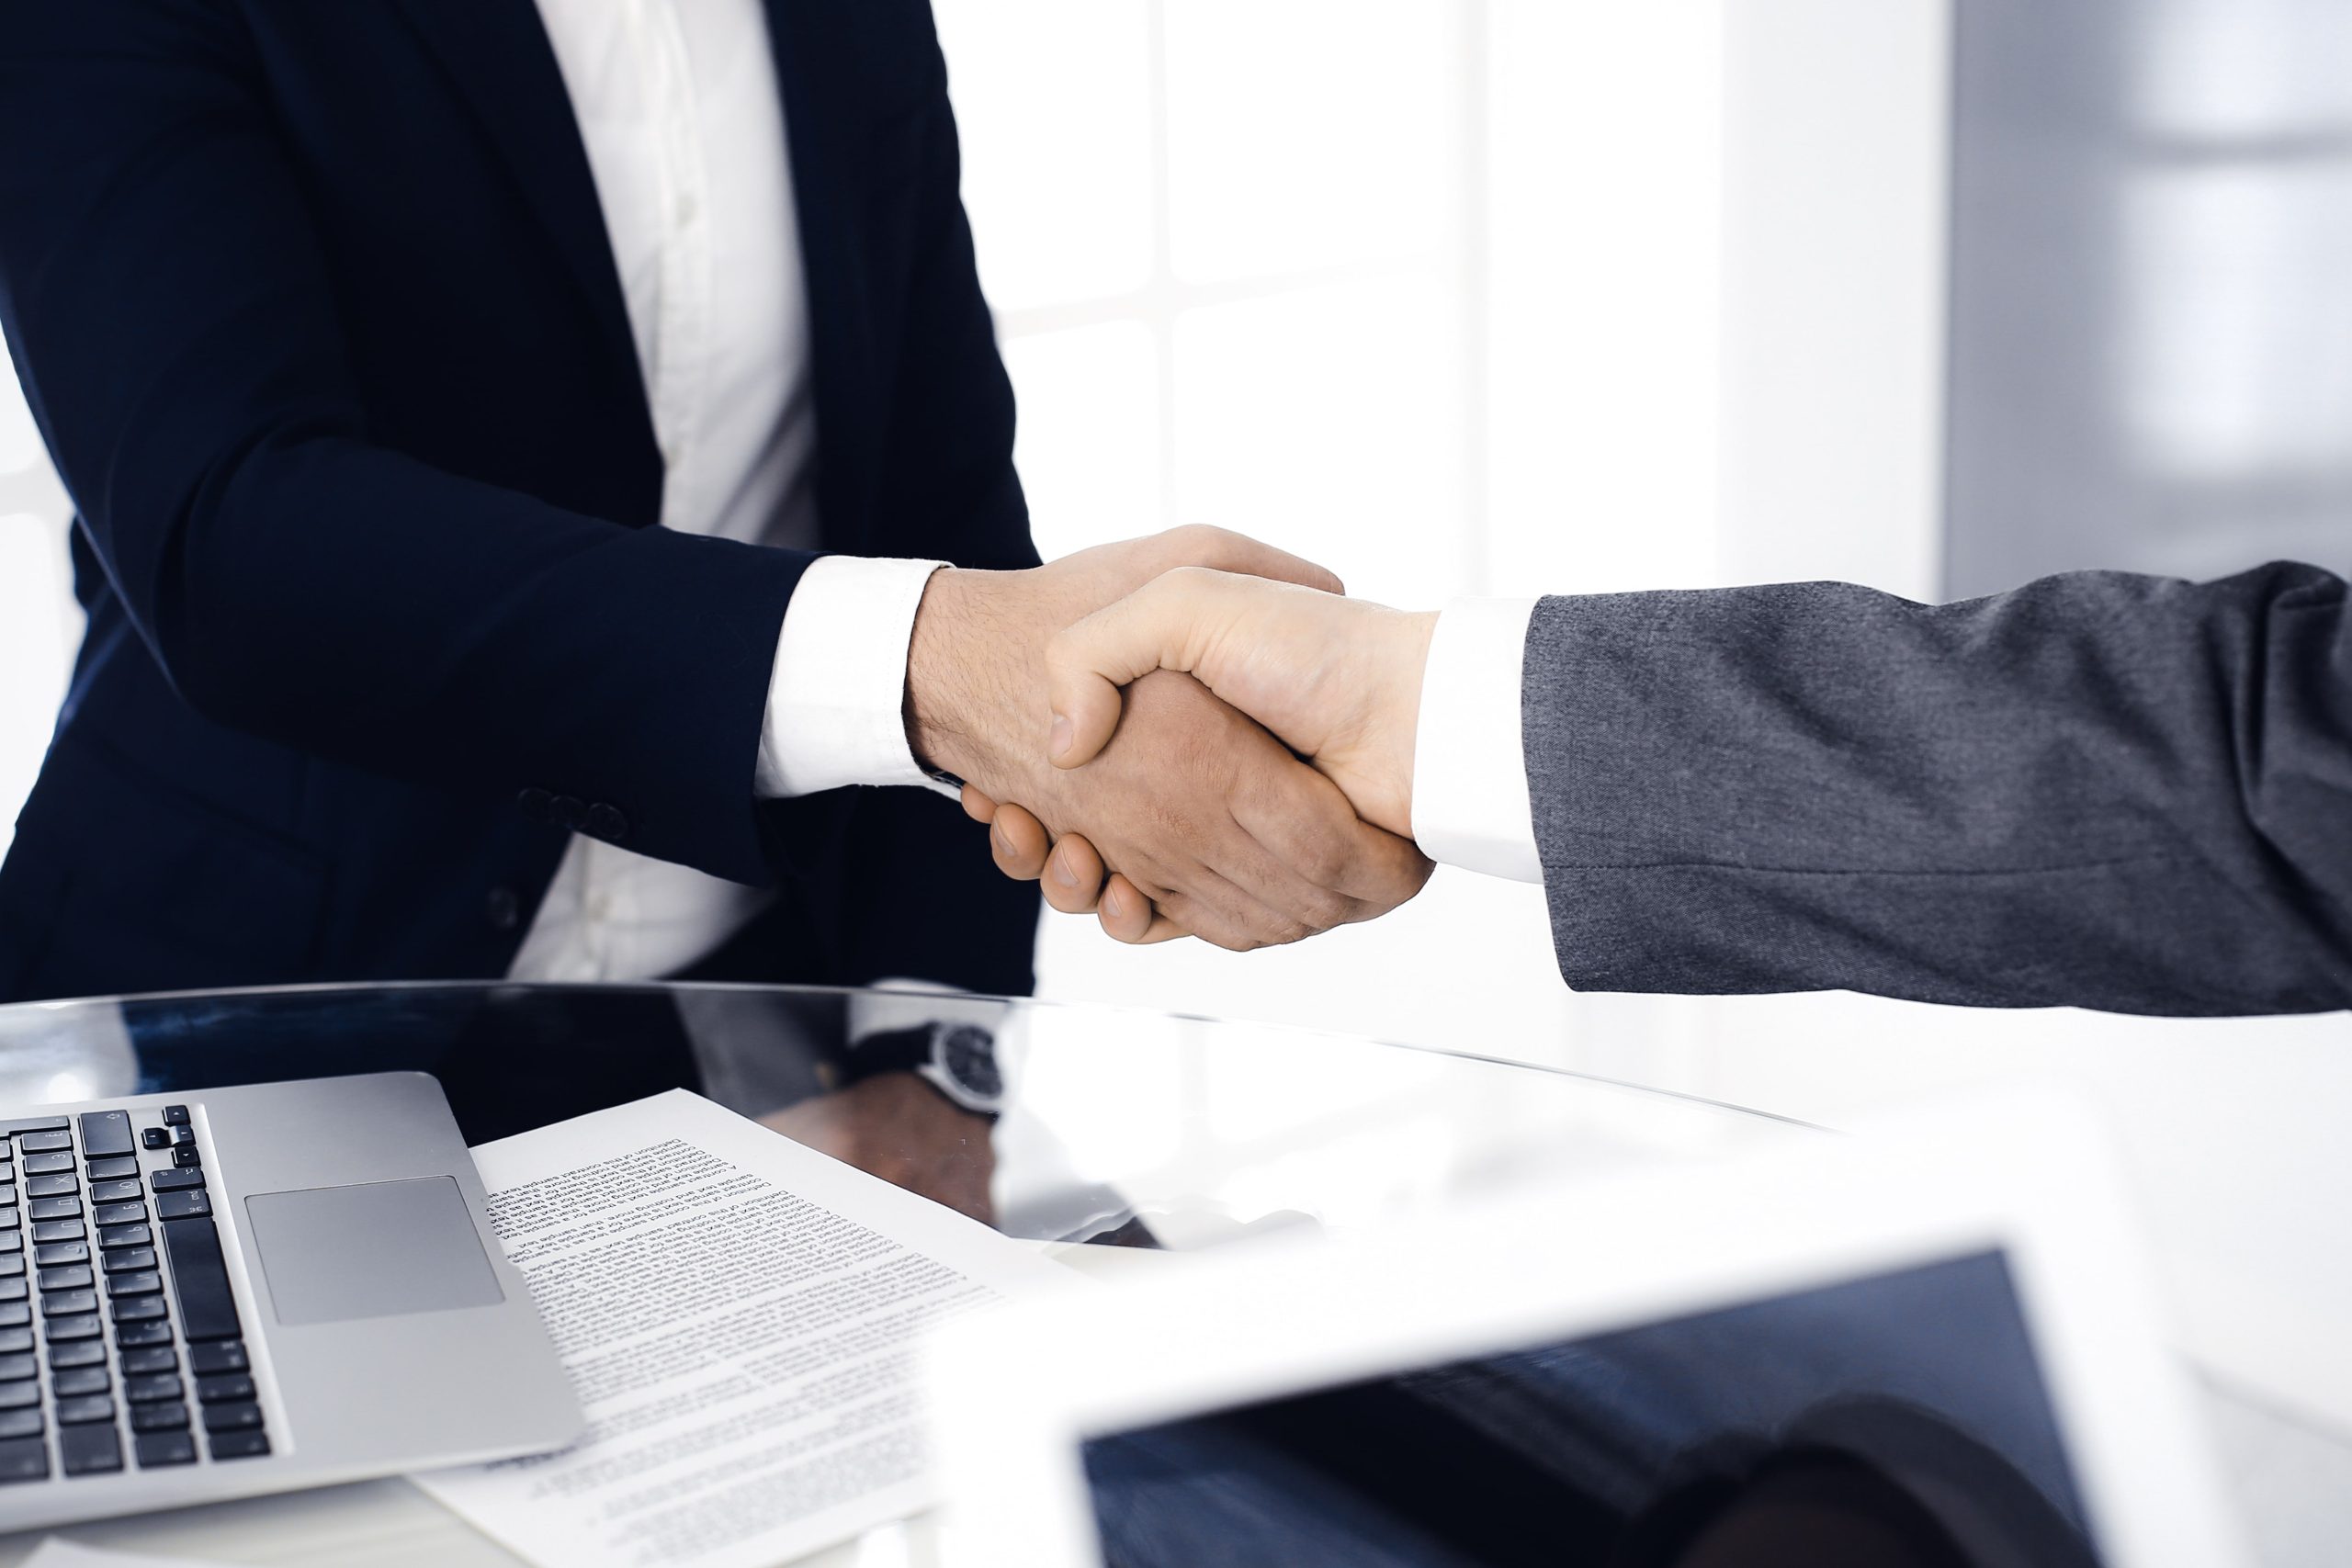 Unknown diverse business people are shaking hands finishing up meeting at the desk in office, close-up